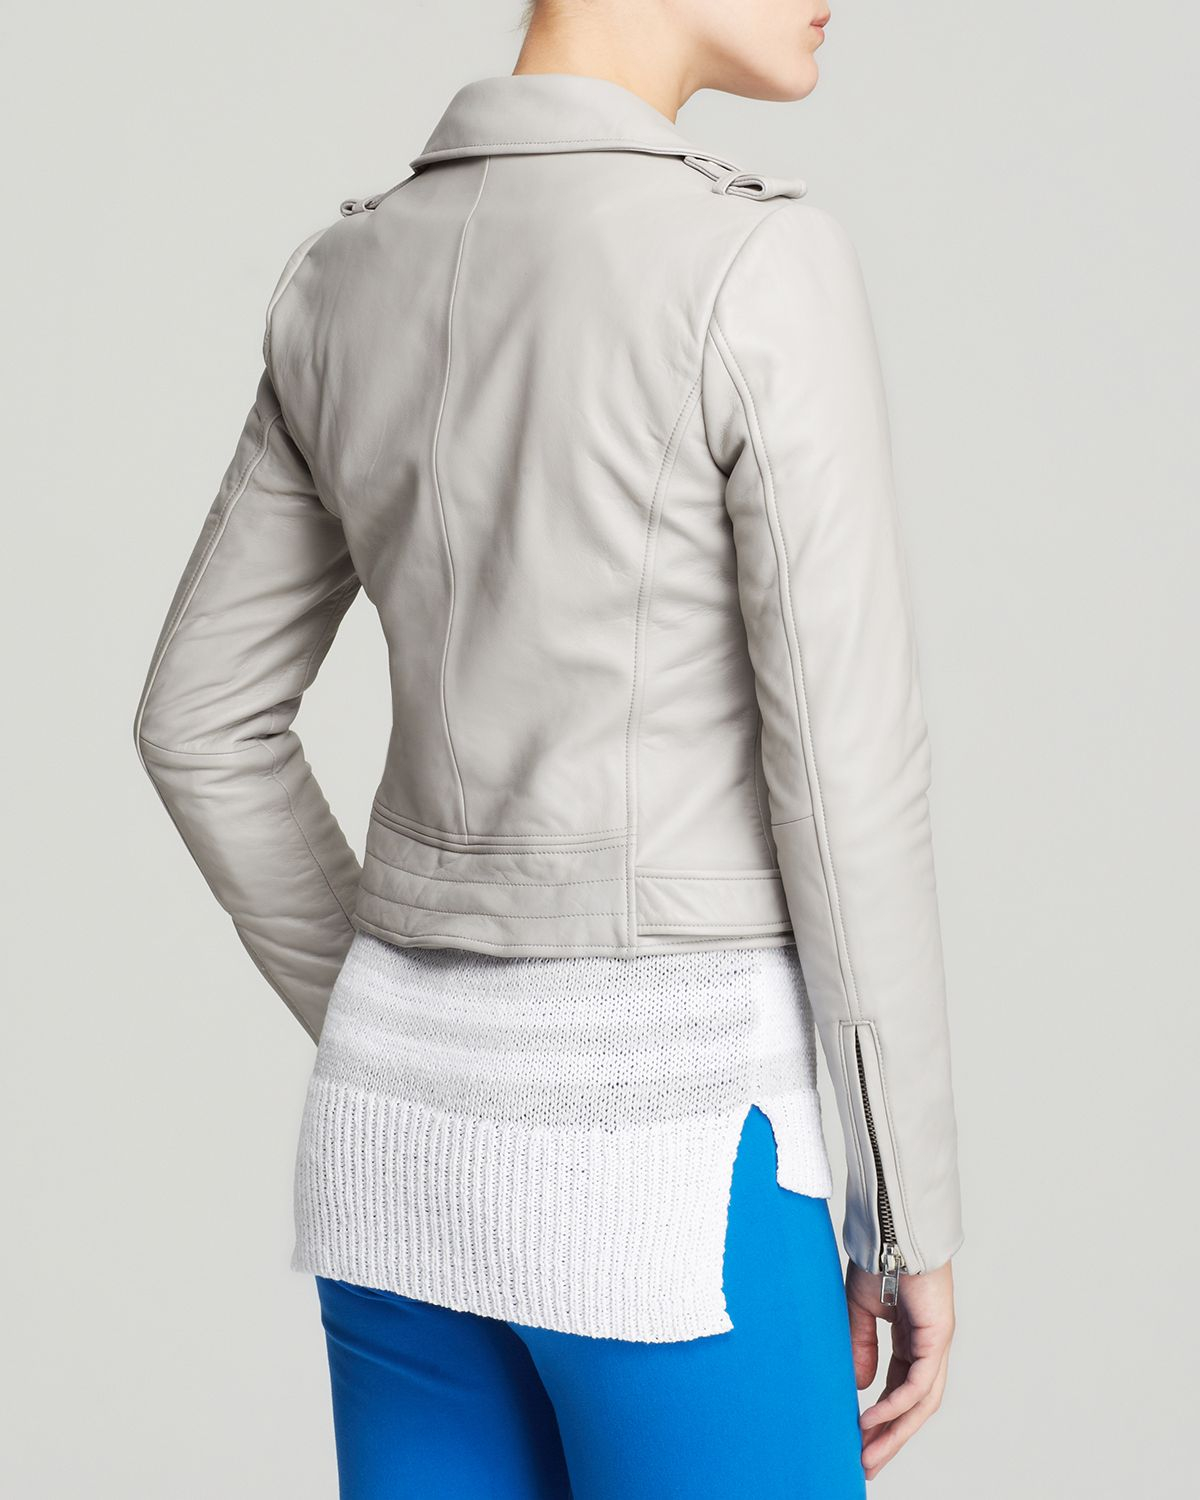 Dylan Gray Leather Moto Jacket in Gray Lyst